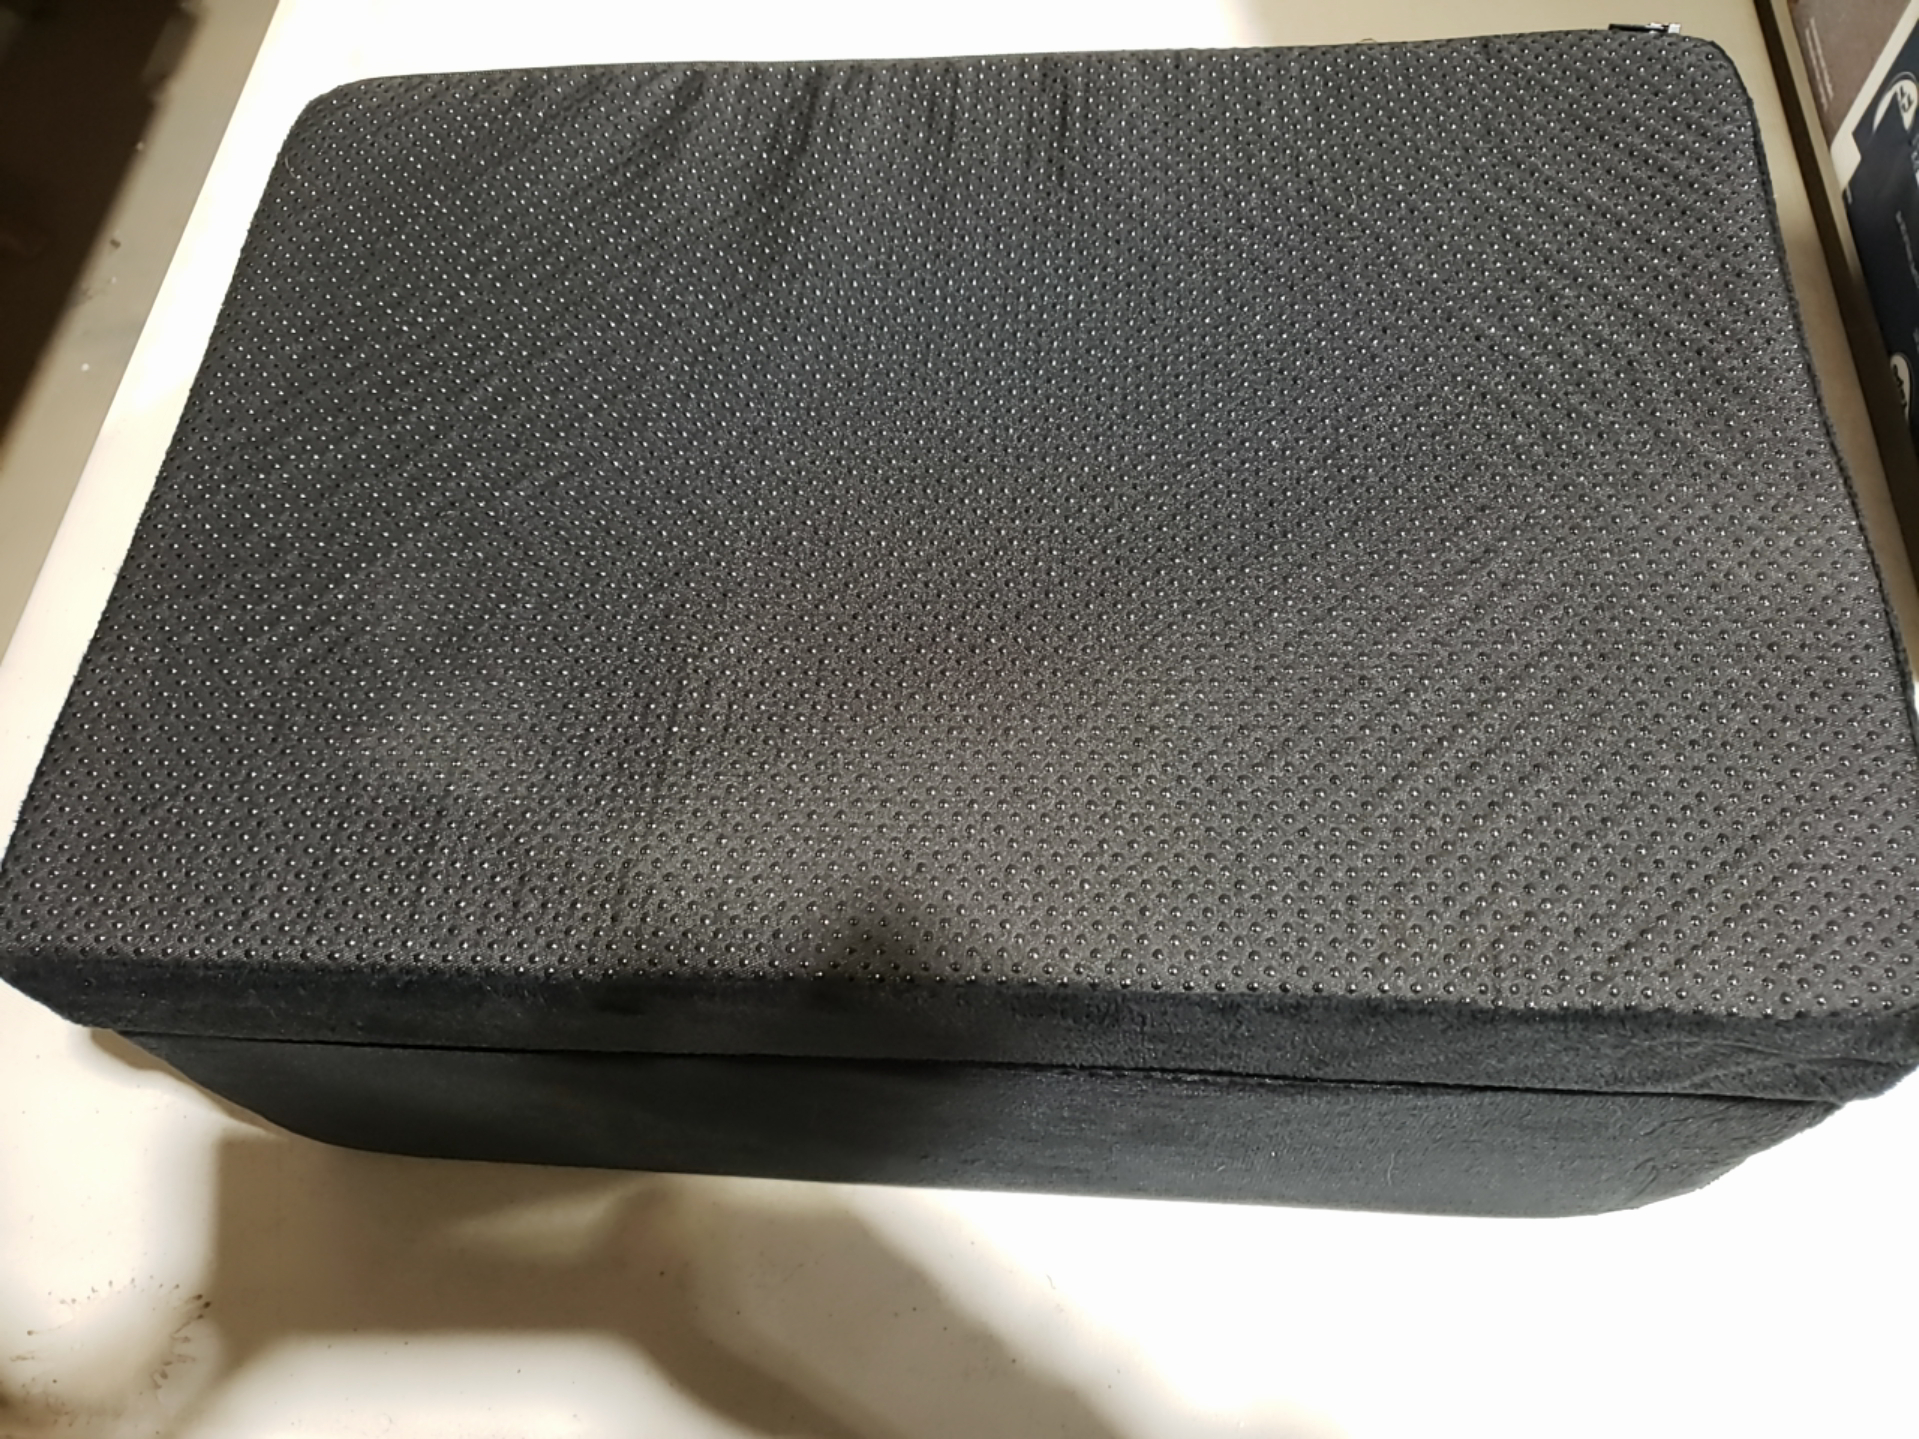 ErgoFoam XL Foot Rest for Stools and High Chairs